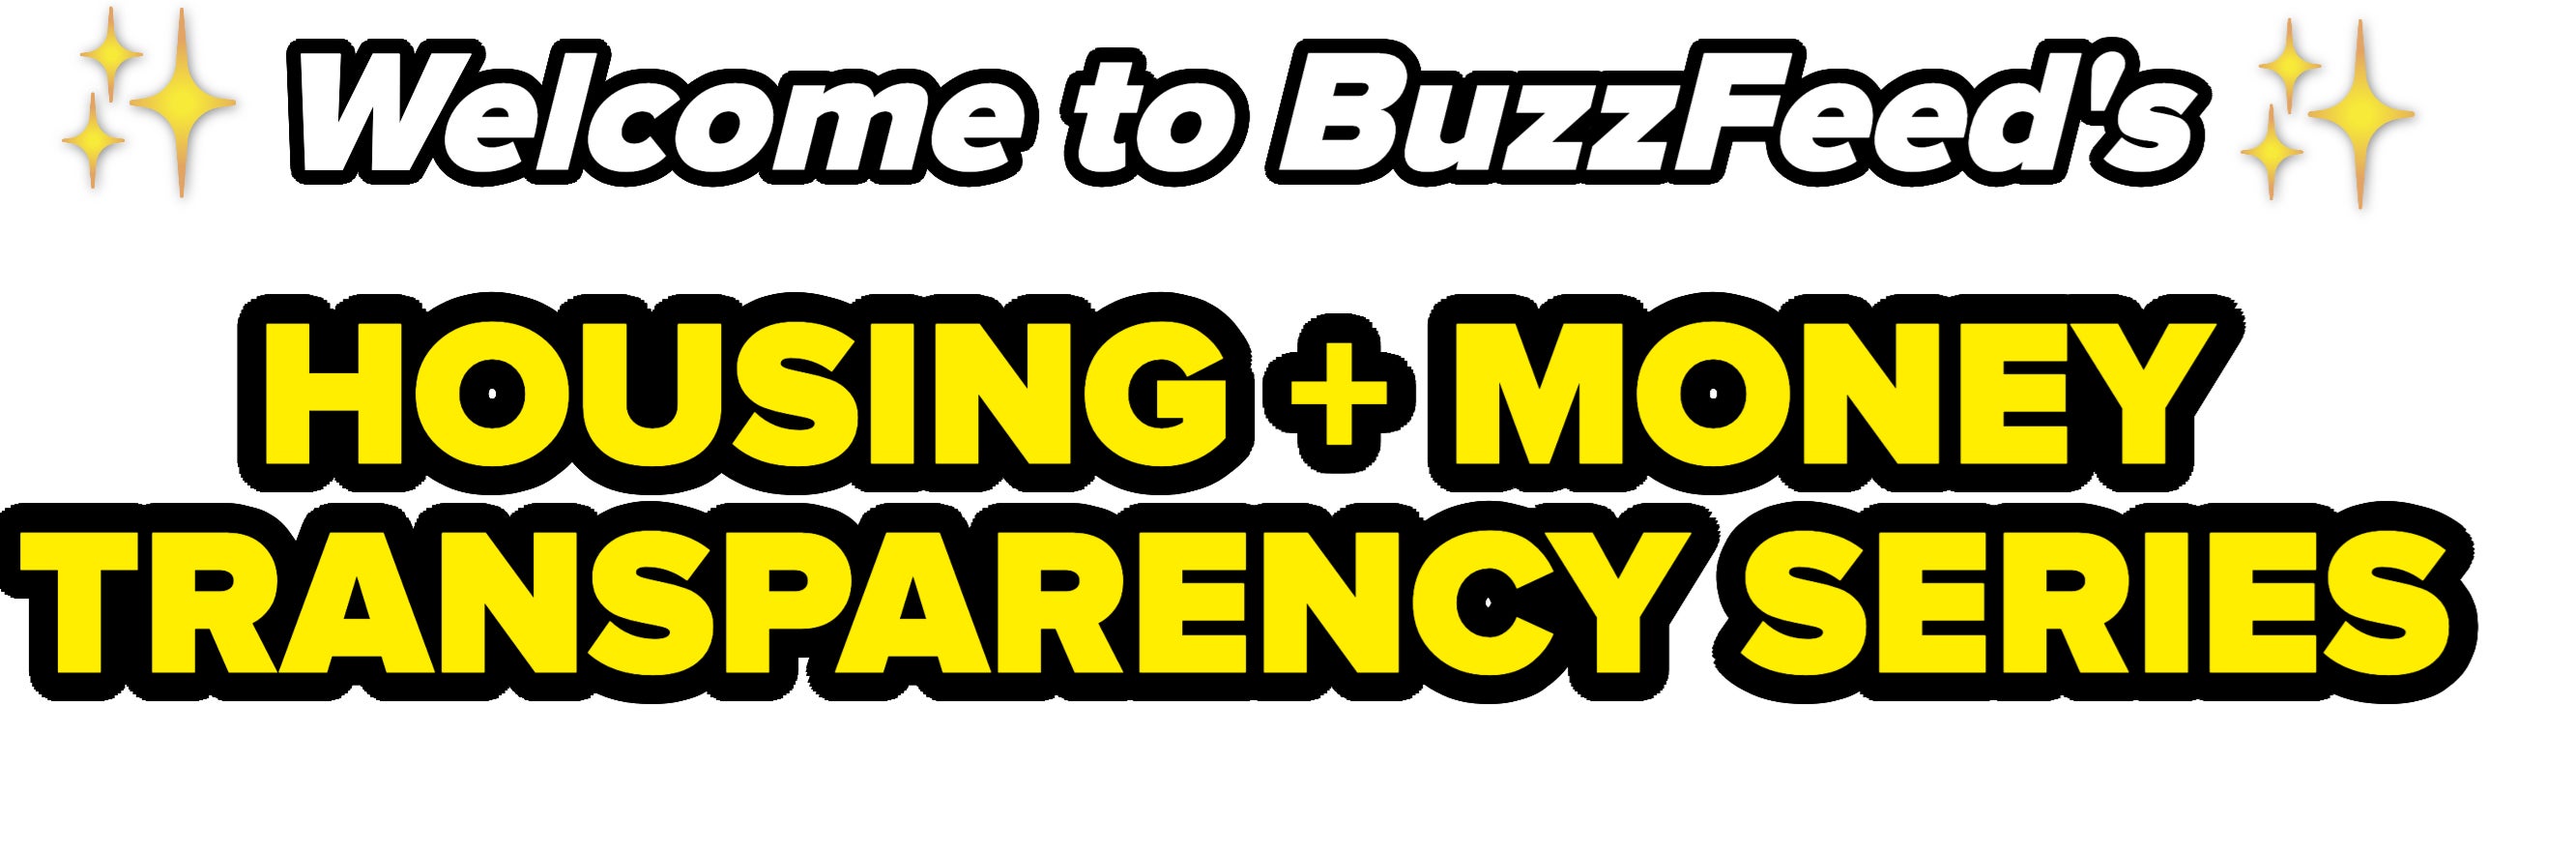 &quot;Welcome to BuzzFeed&#x27;s Housing + Money Transparency Series&quot;